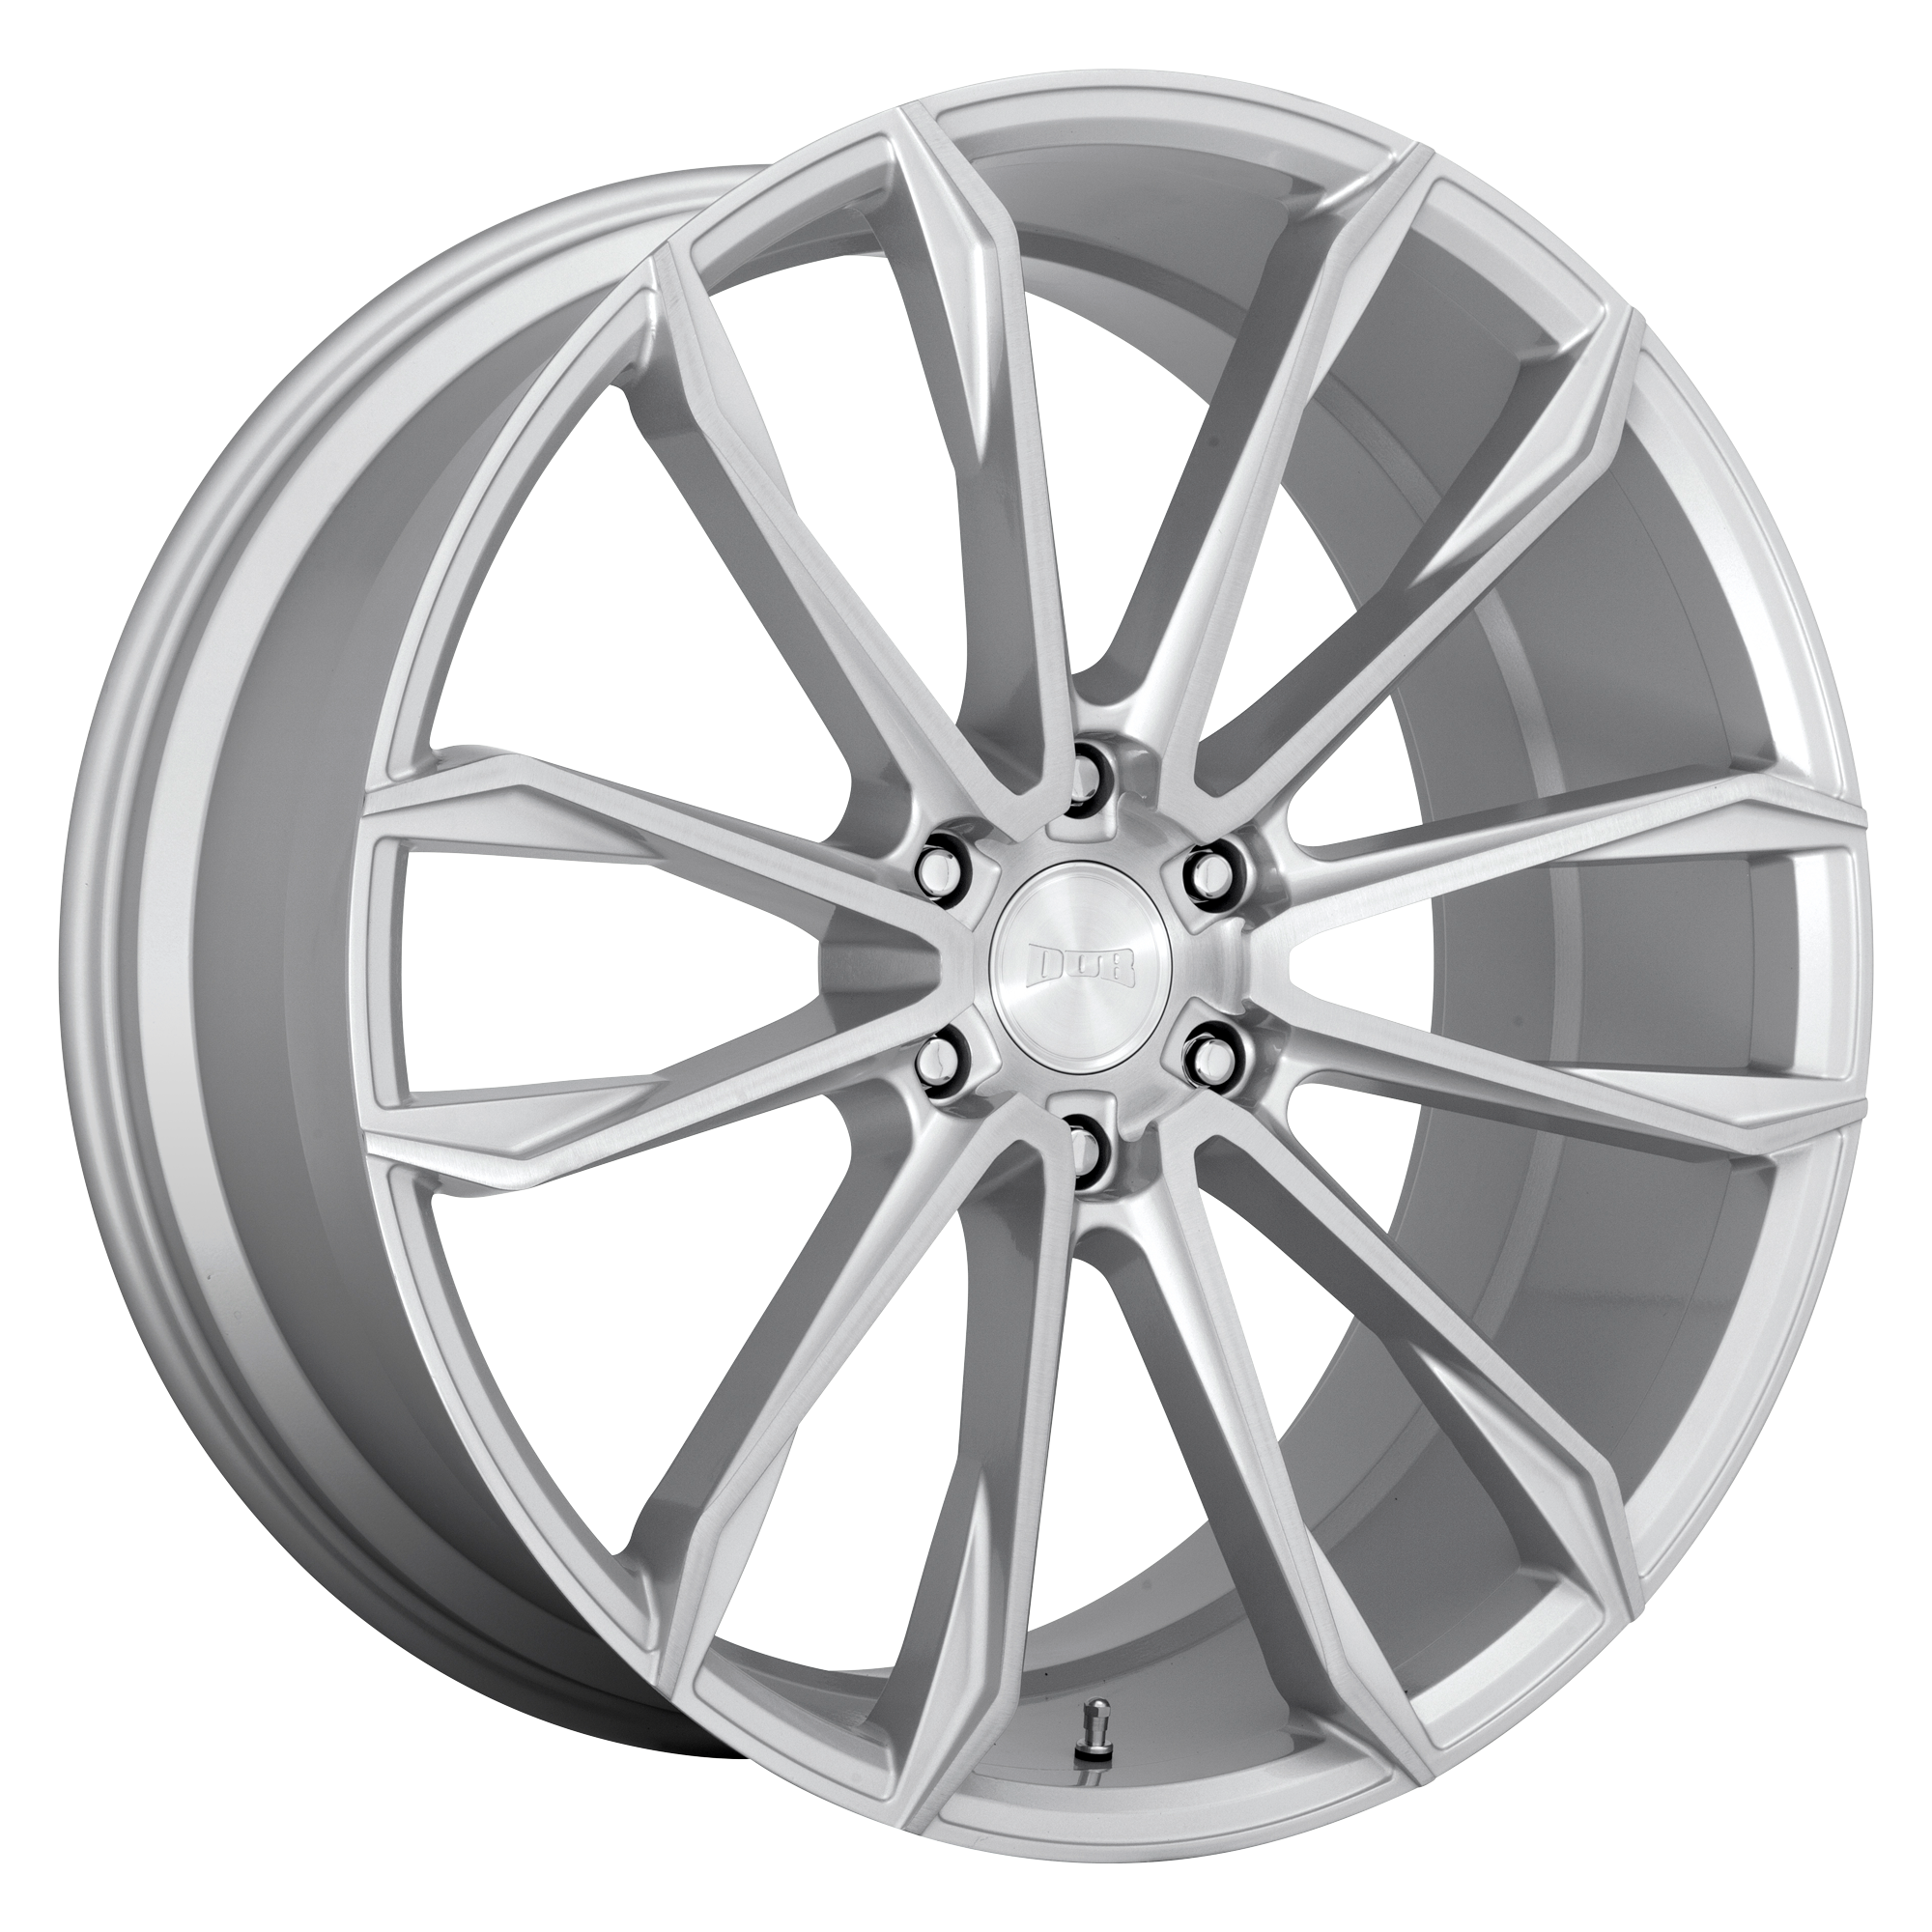 CLOUT 24x10 6x139.70 GLOSS SILVER BRUSHED (30 mm) - Tires and Engine Performance